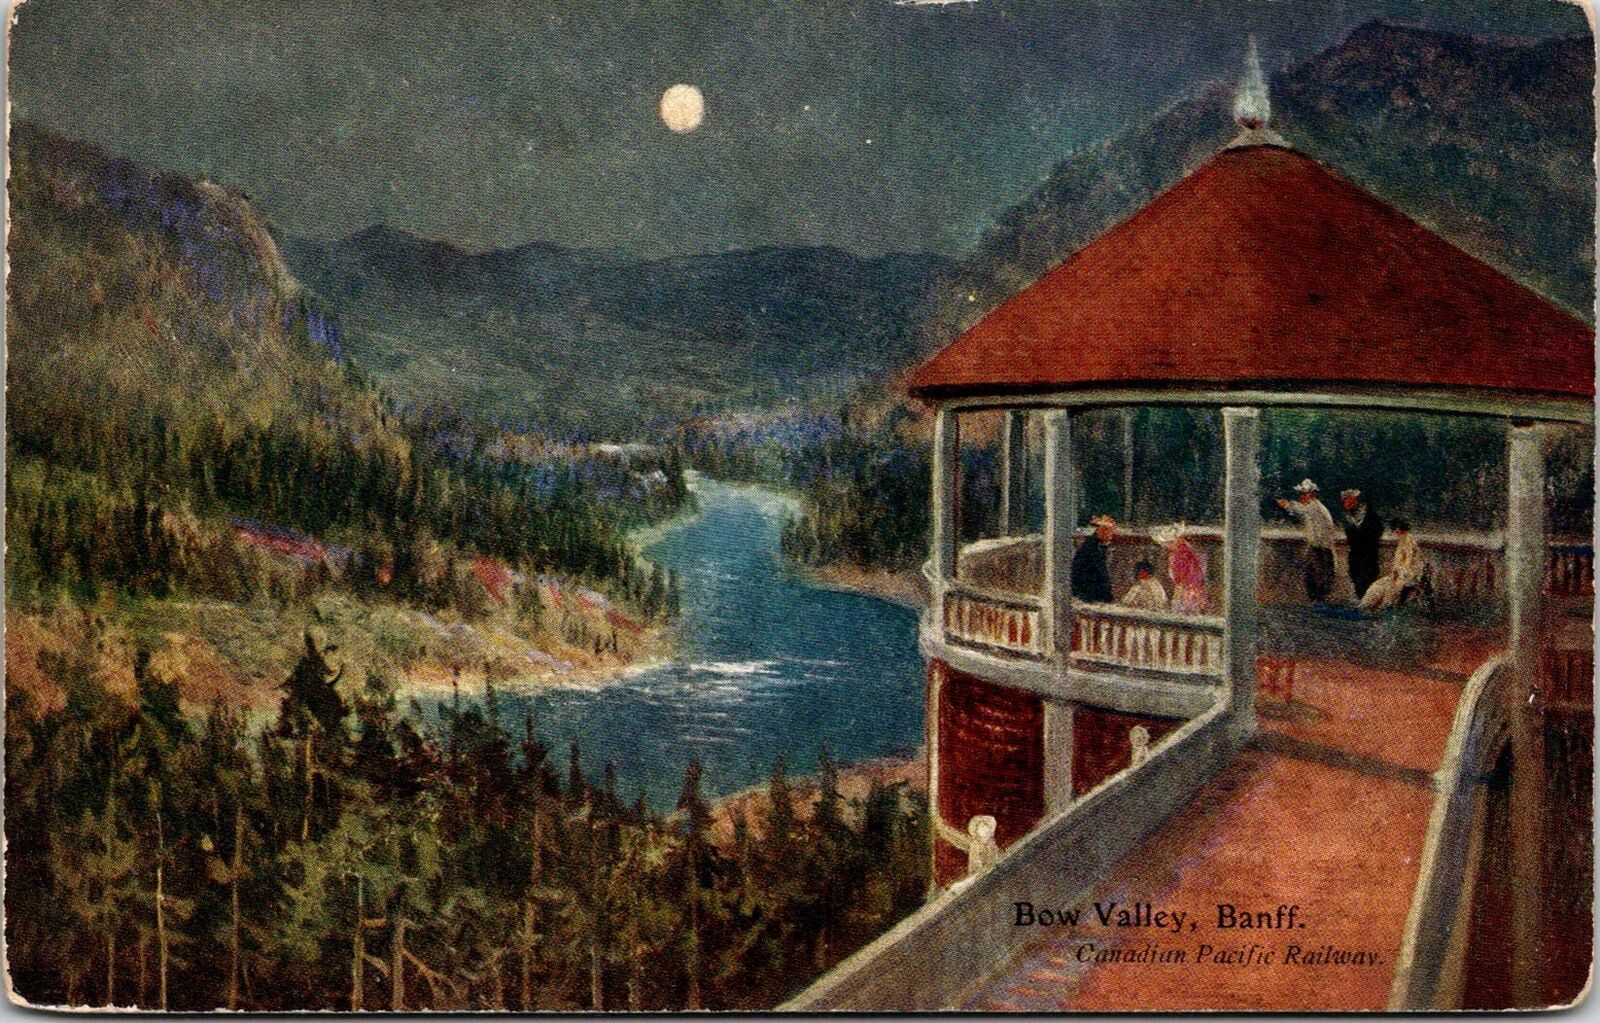 VINTAGE POSTCARD AT THE LOOKOUT BOW VALLEY BANFF CANADIAN PACIFIC RAILWAY CARD